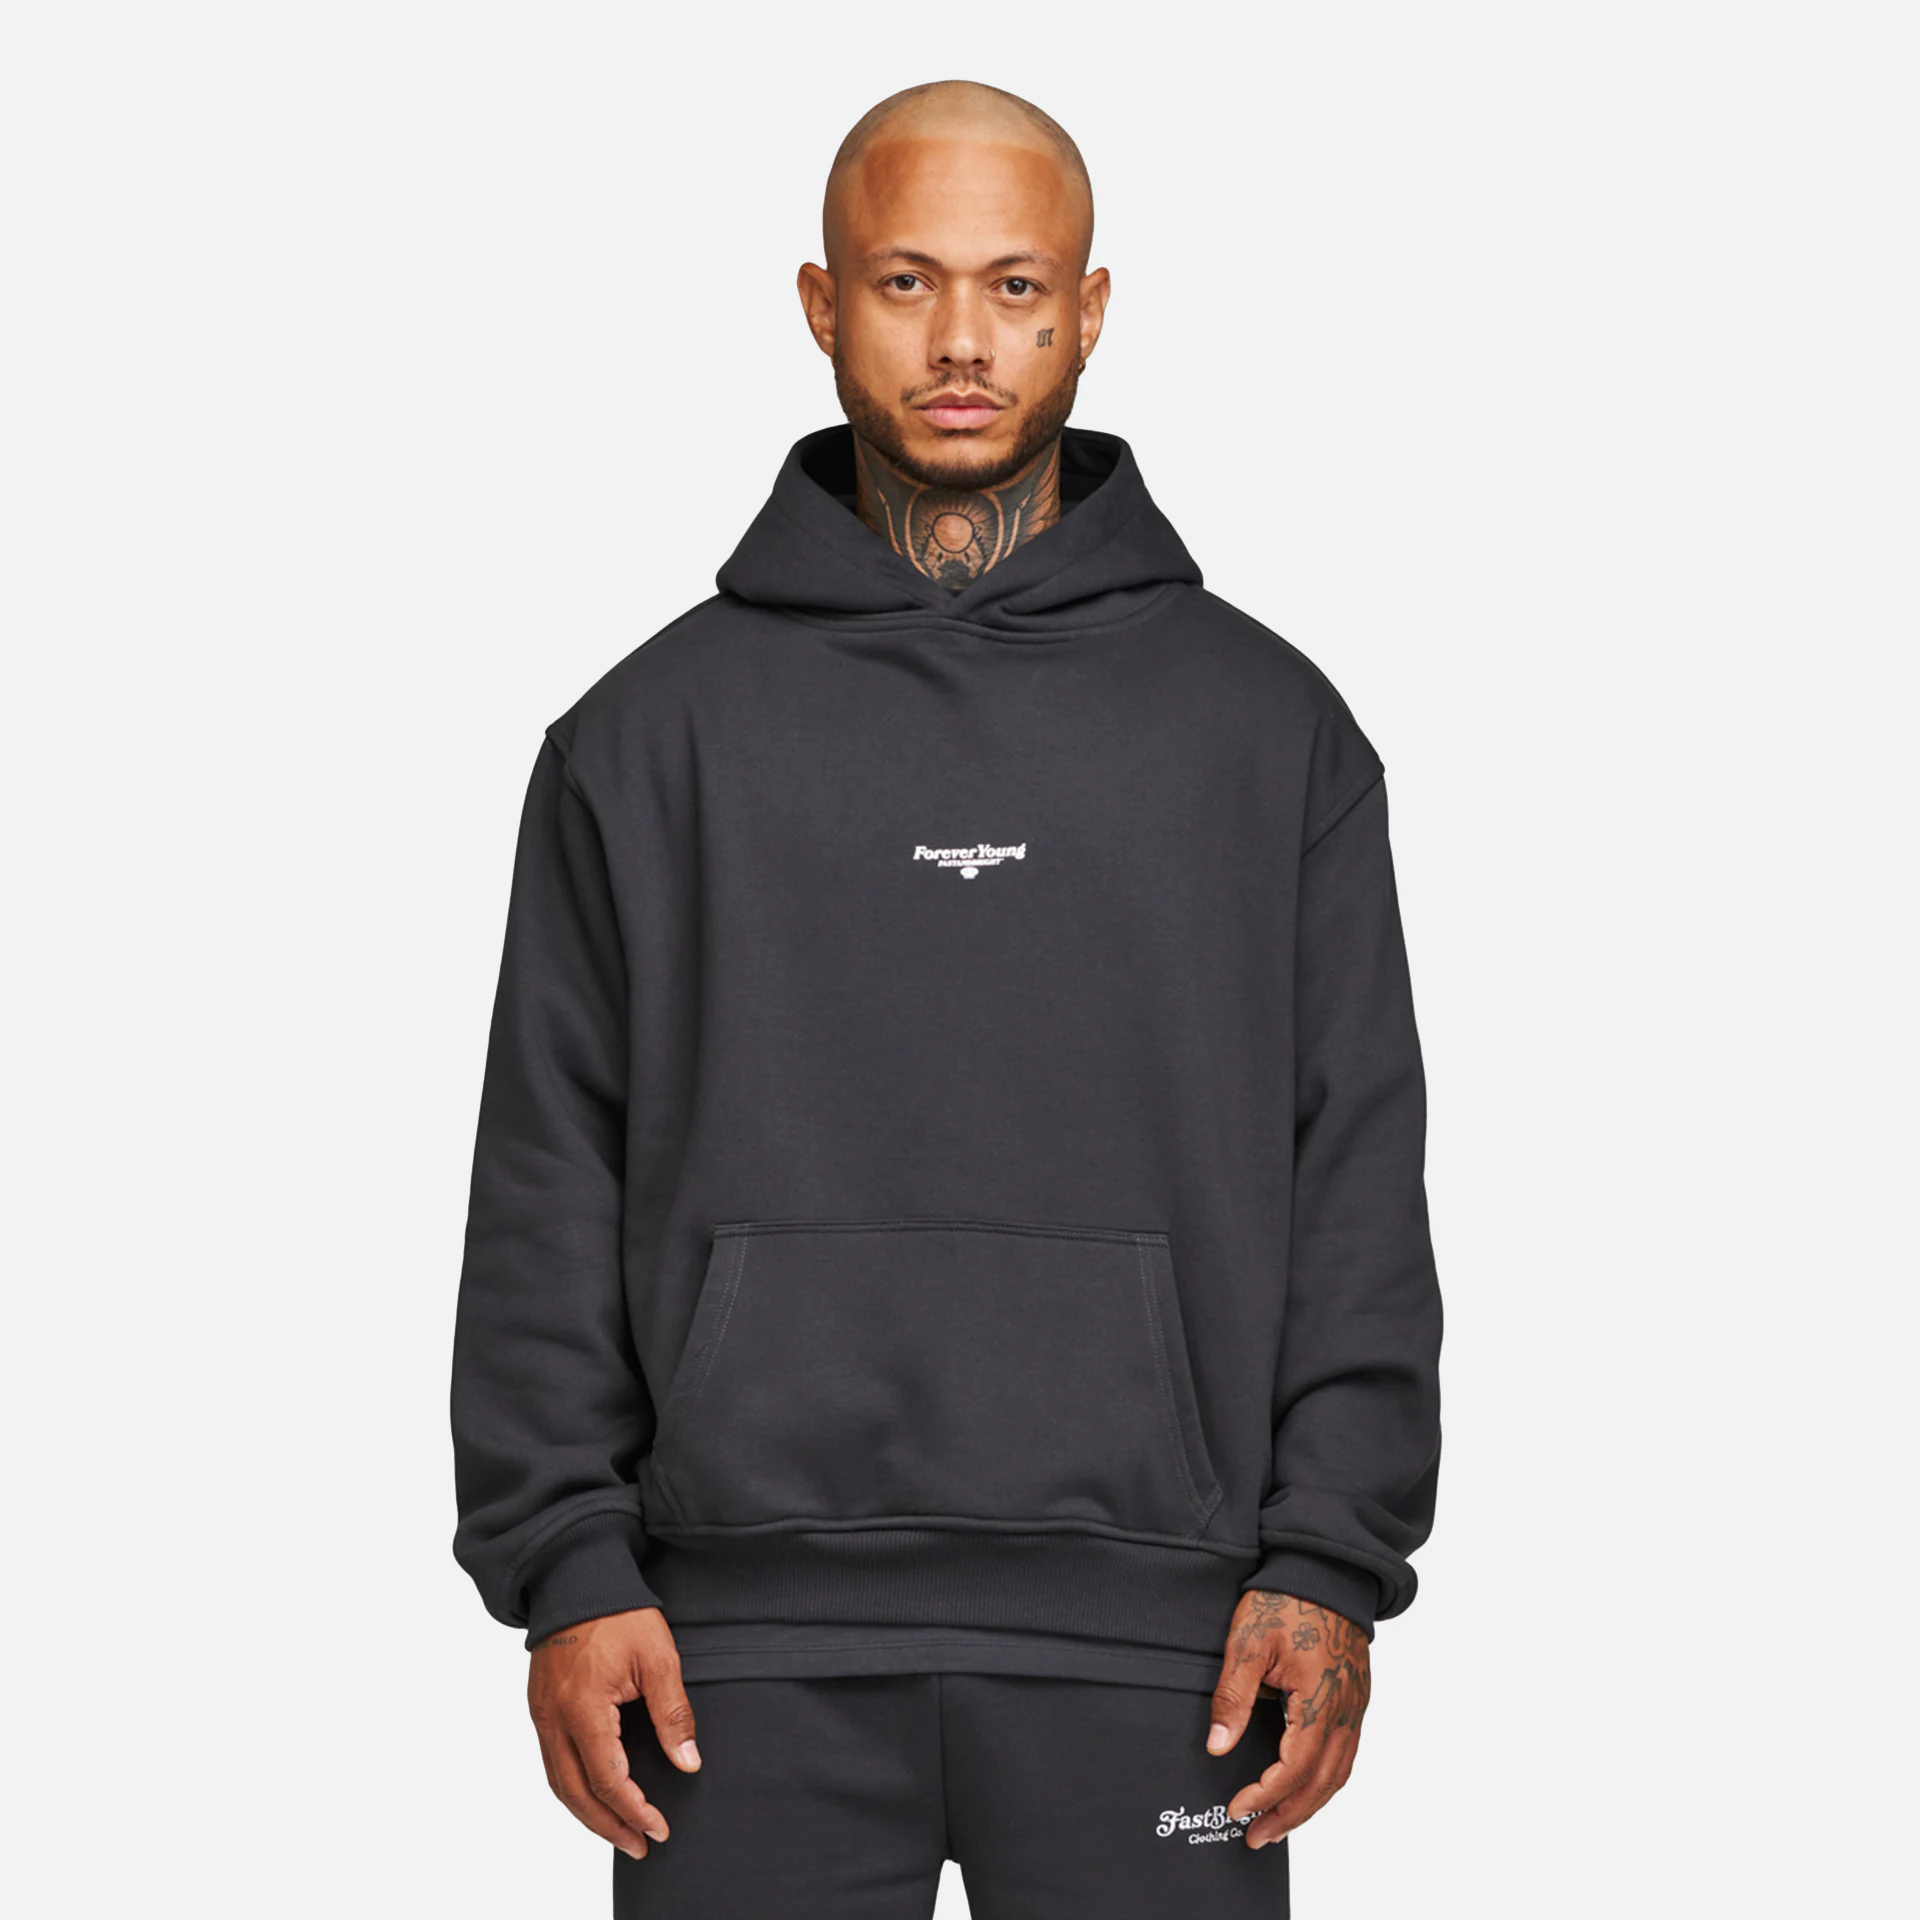 Fast and Bright Kid Hoodie Washed Black